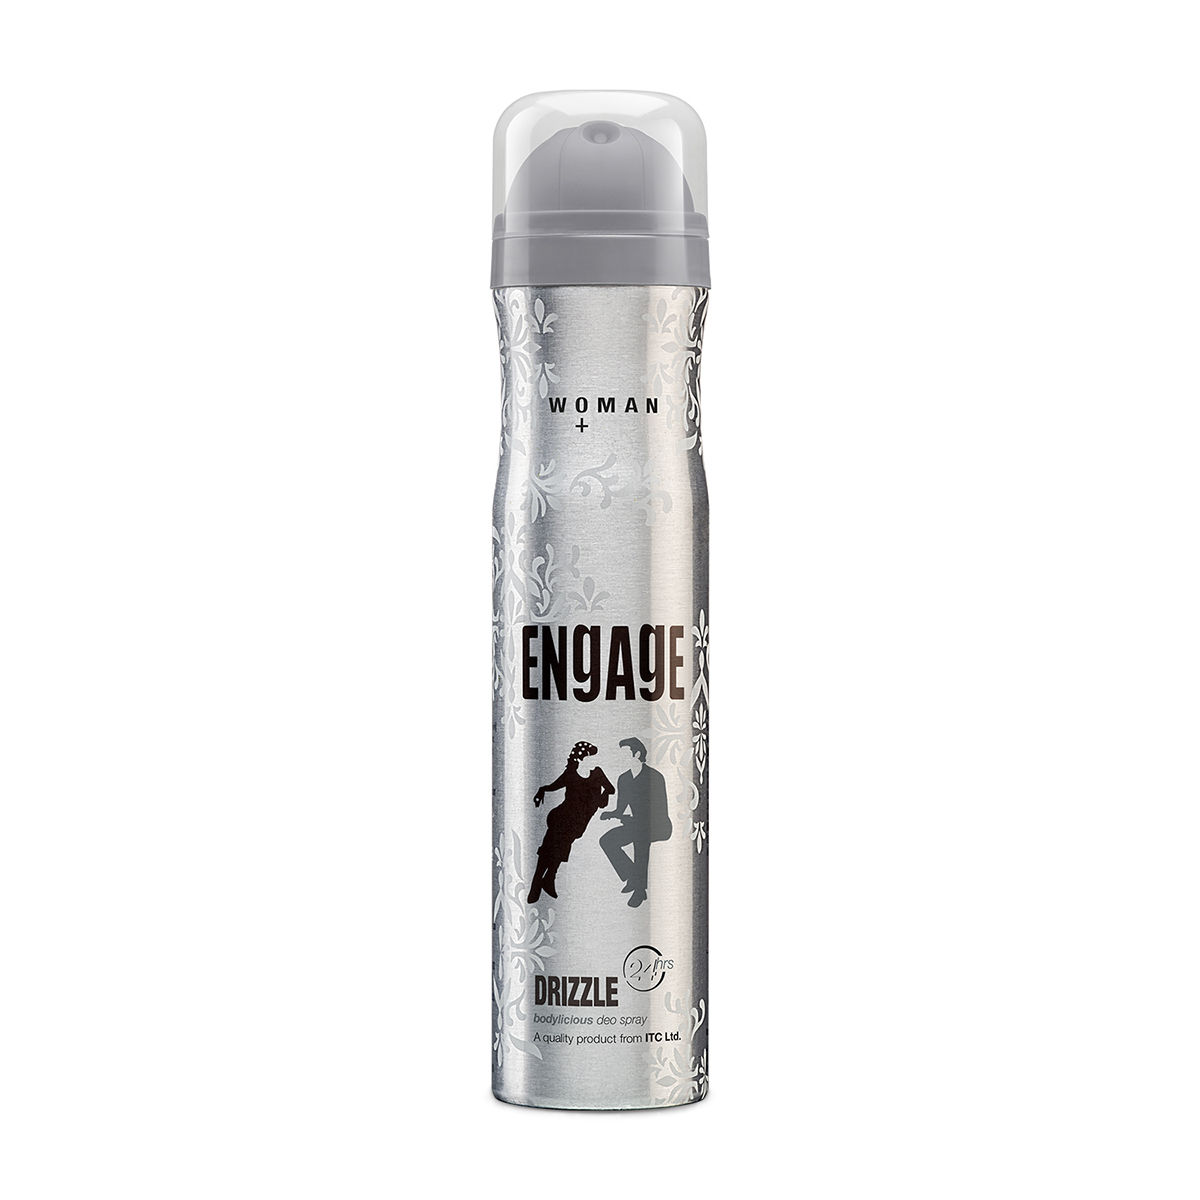 Engage Drizzle Deodorant For Women